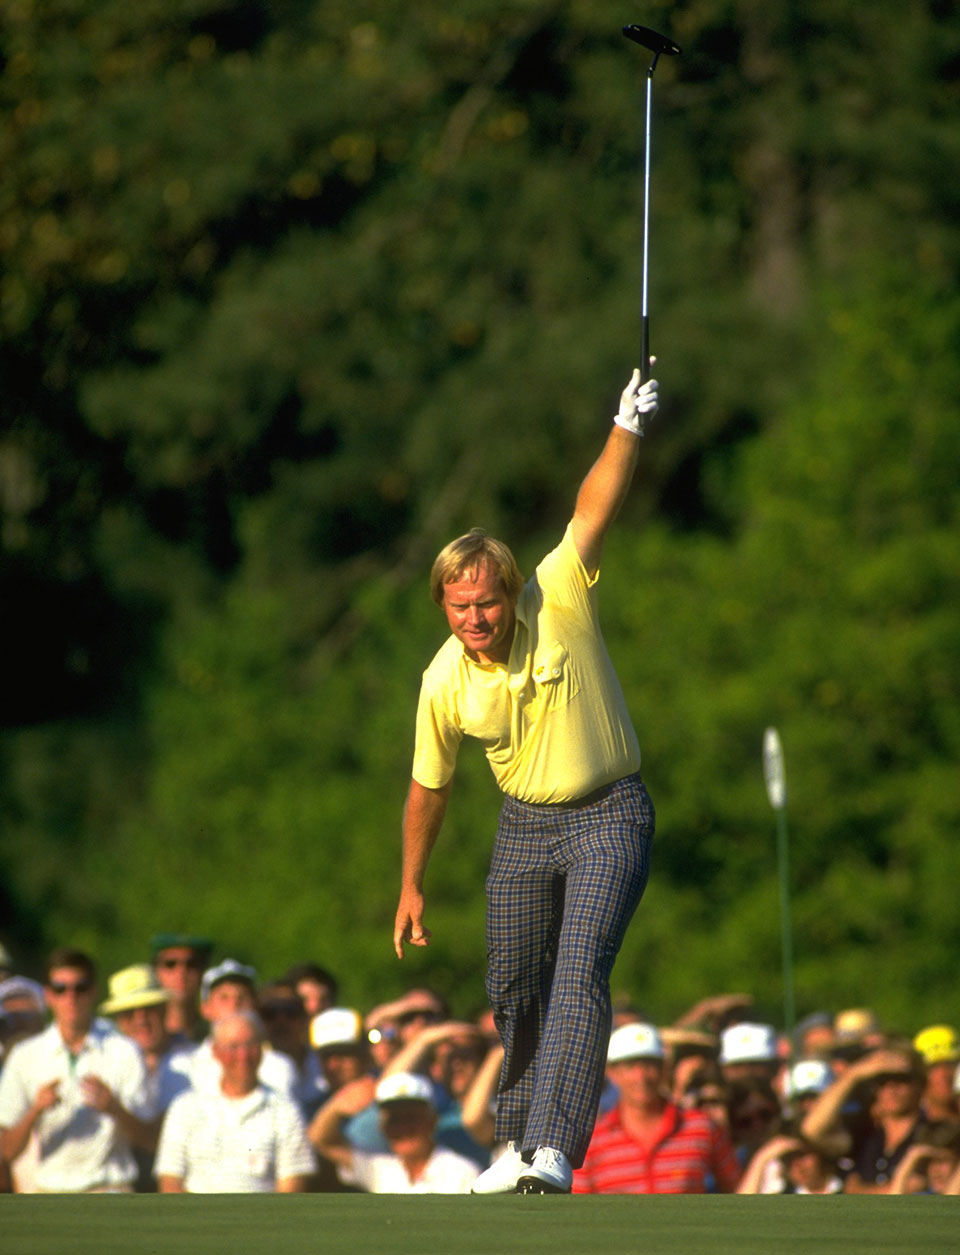 Jack Nicklaus birdied 17 en route to winning the 1986 Masters (Photo: David Cannon/Getty Images)